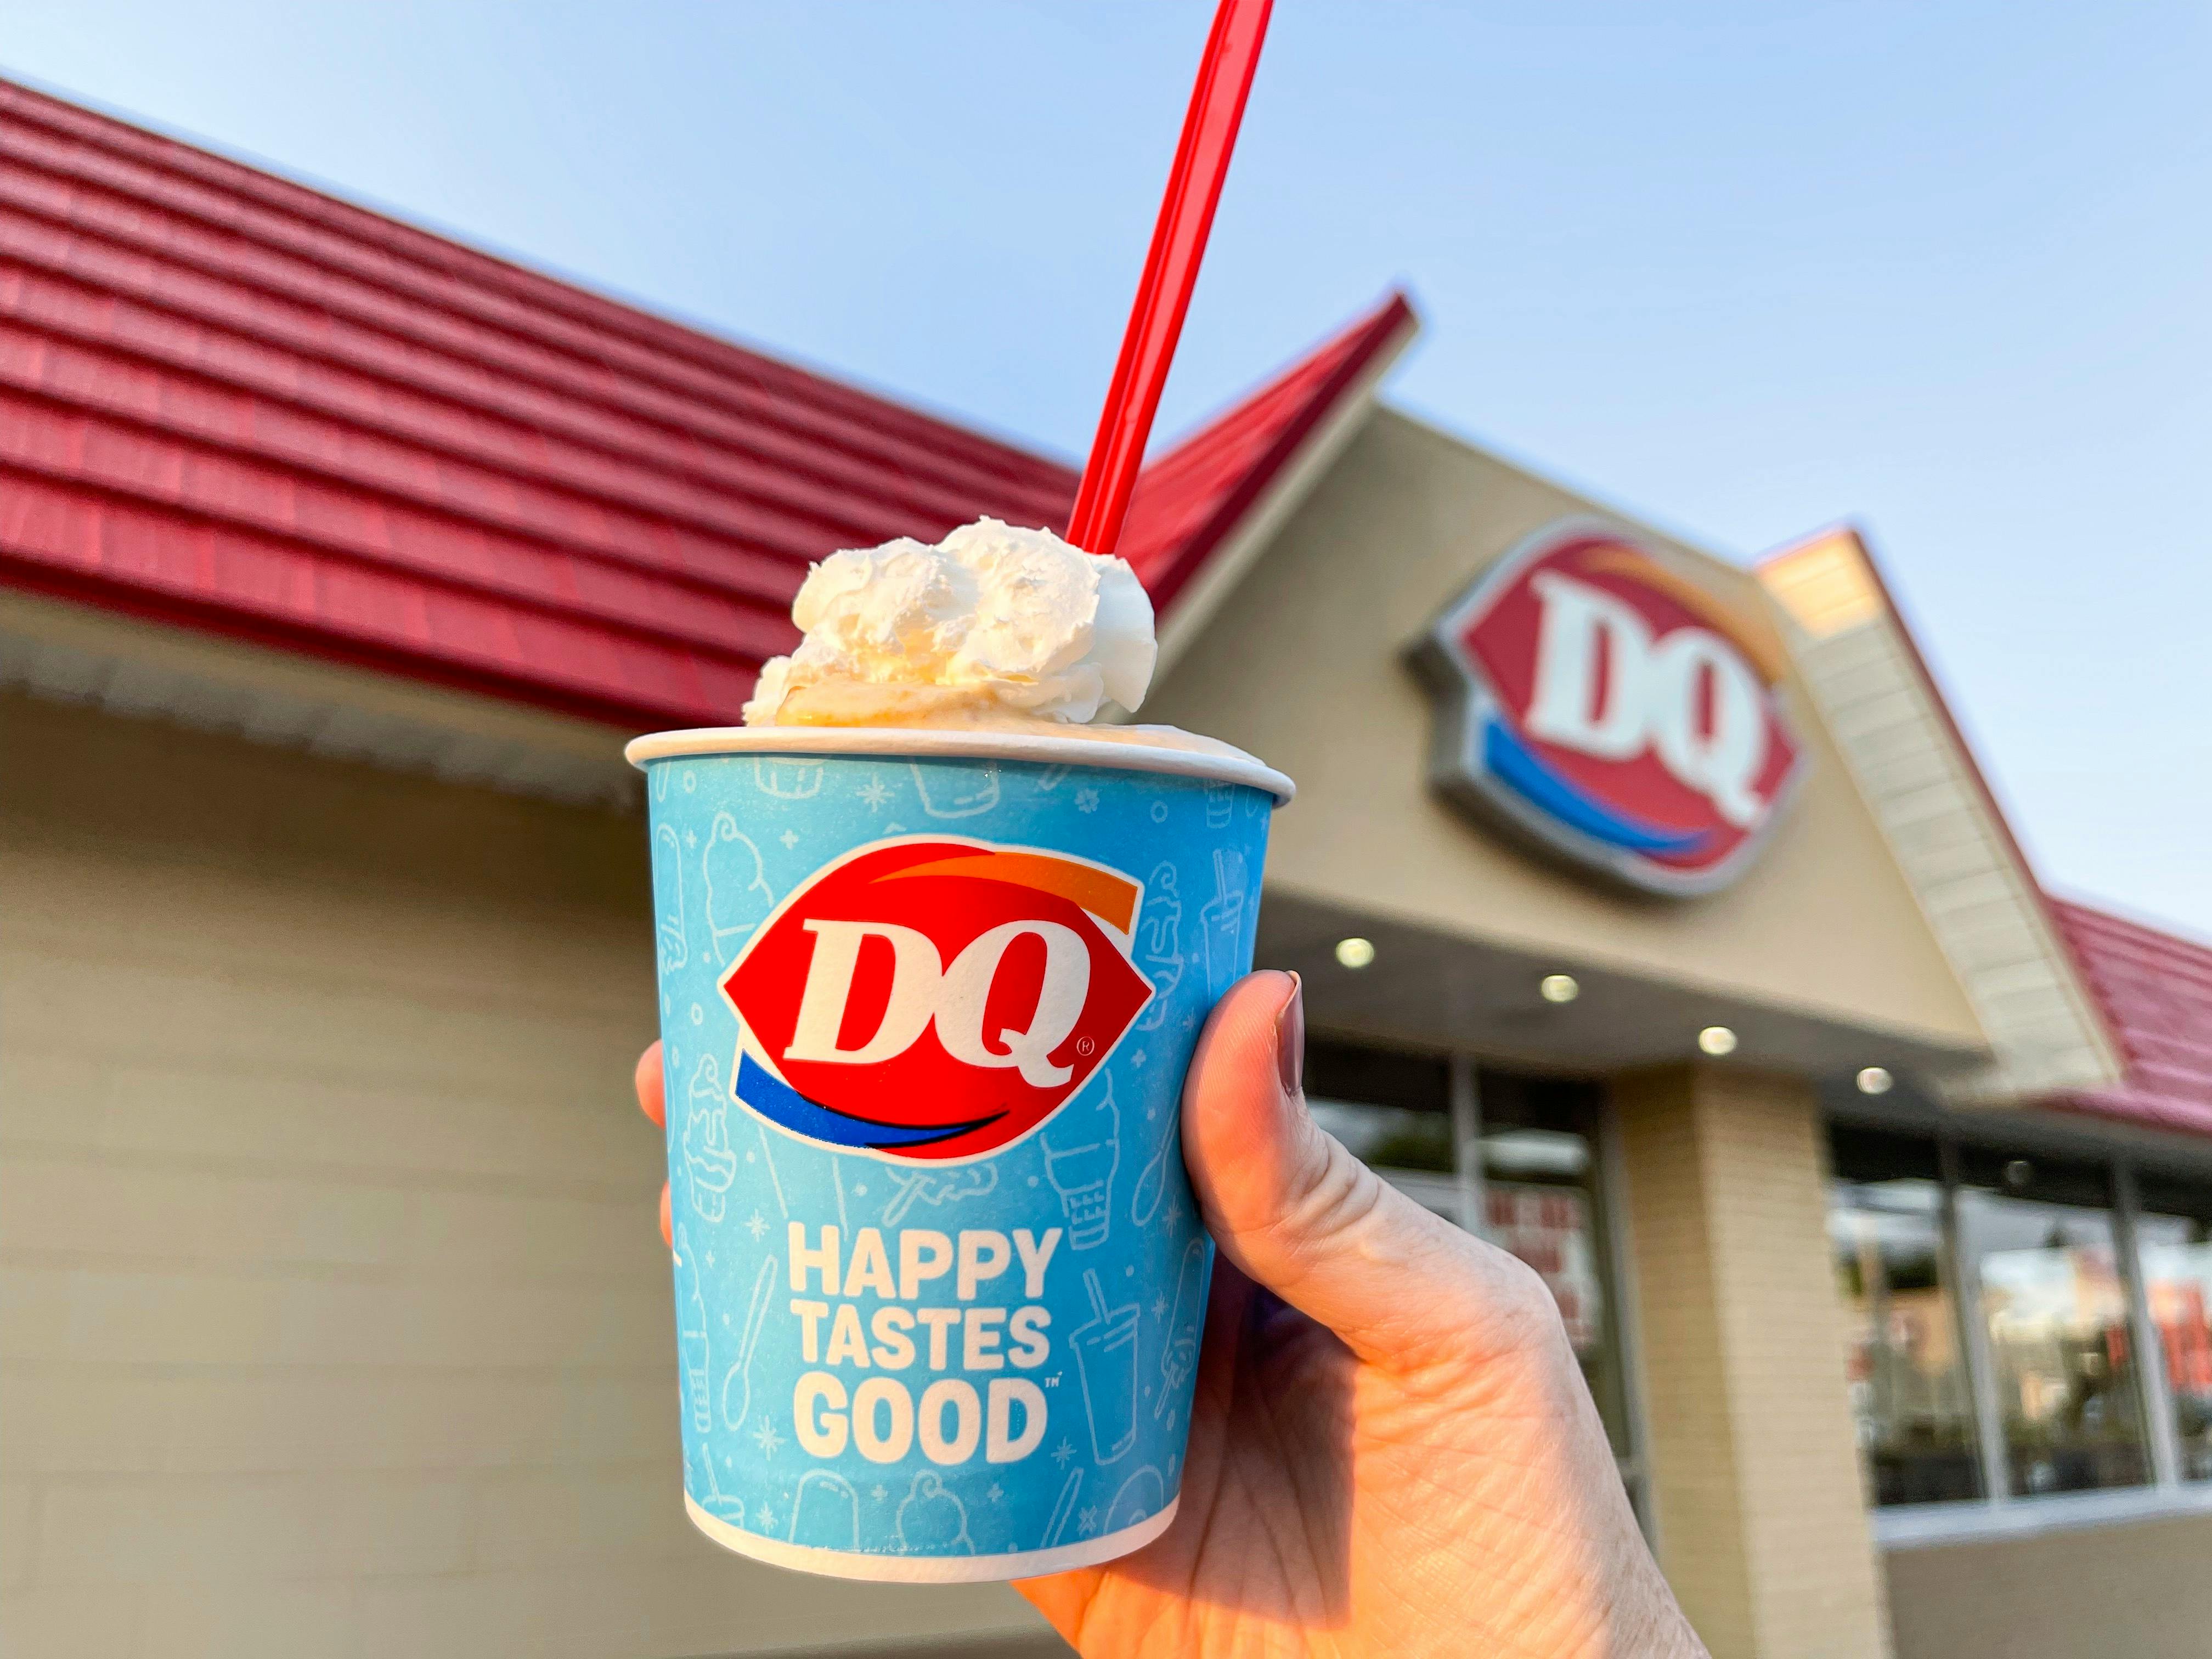 17 Chill Ways to Score Dairy Queen Deals & Specials The Krazy Coupon Lady